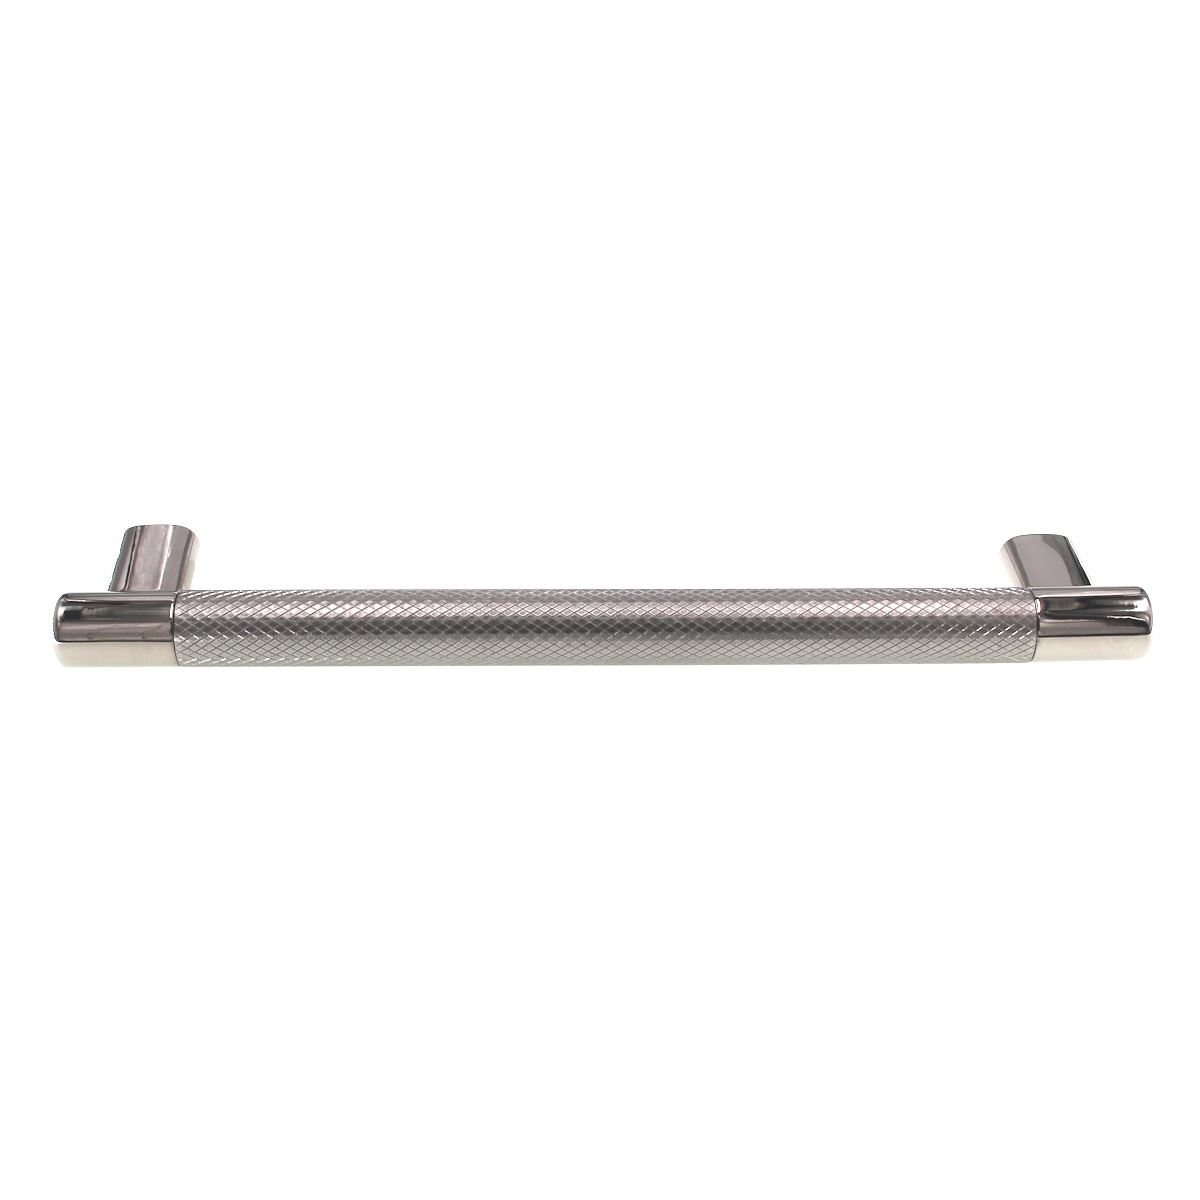 Amerock Esquire Polished Nickel Stainless Steel 8" Ctr Bar Pull BP36562PNSS